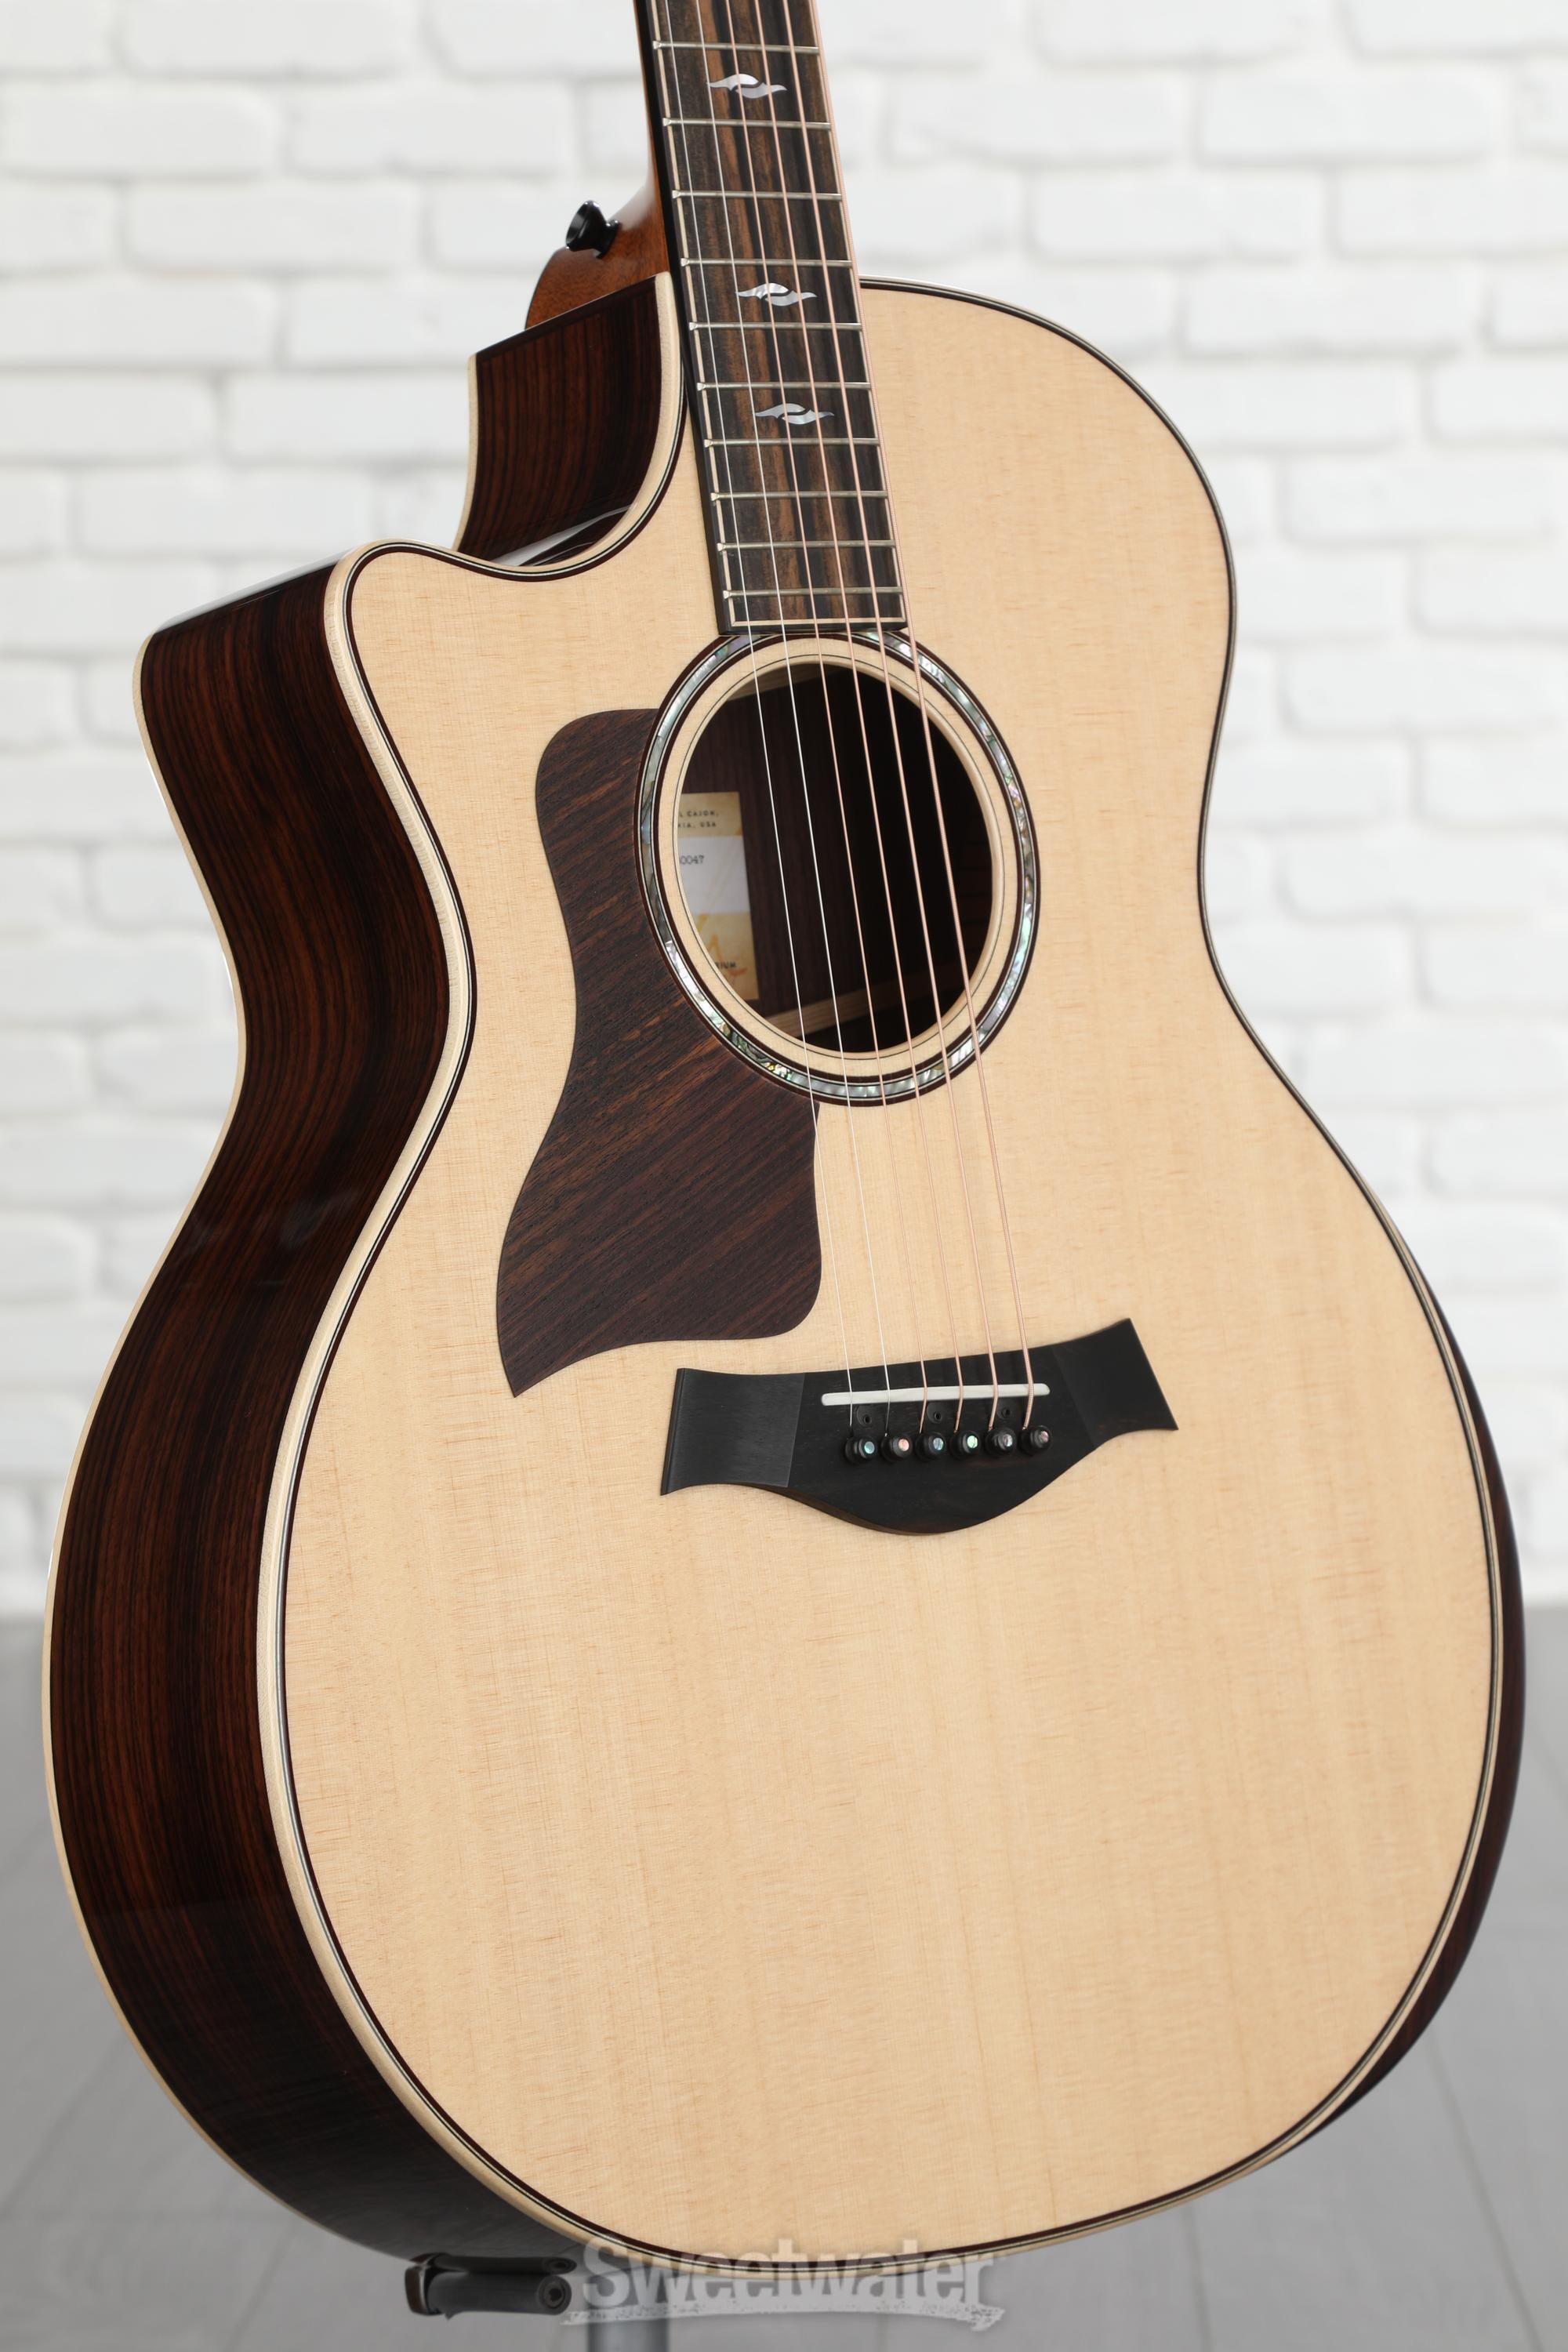 Taylor 814ce Left-handed Acoustic-electric Guitar - Natural with V 